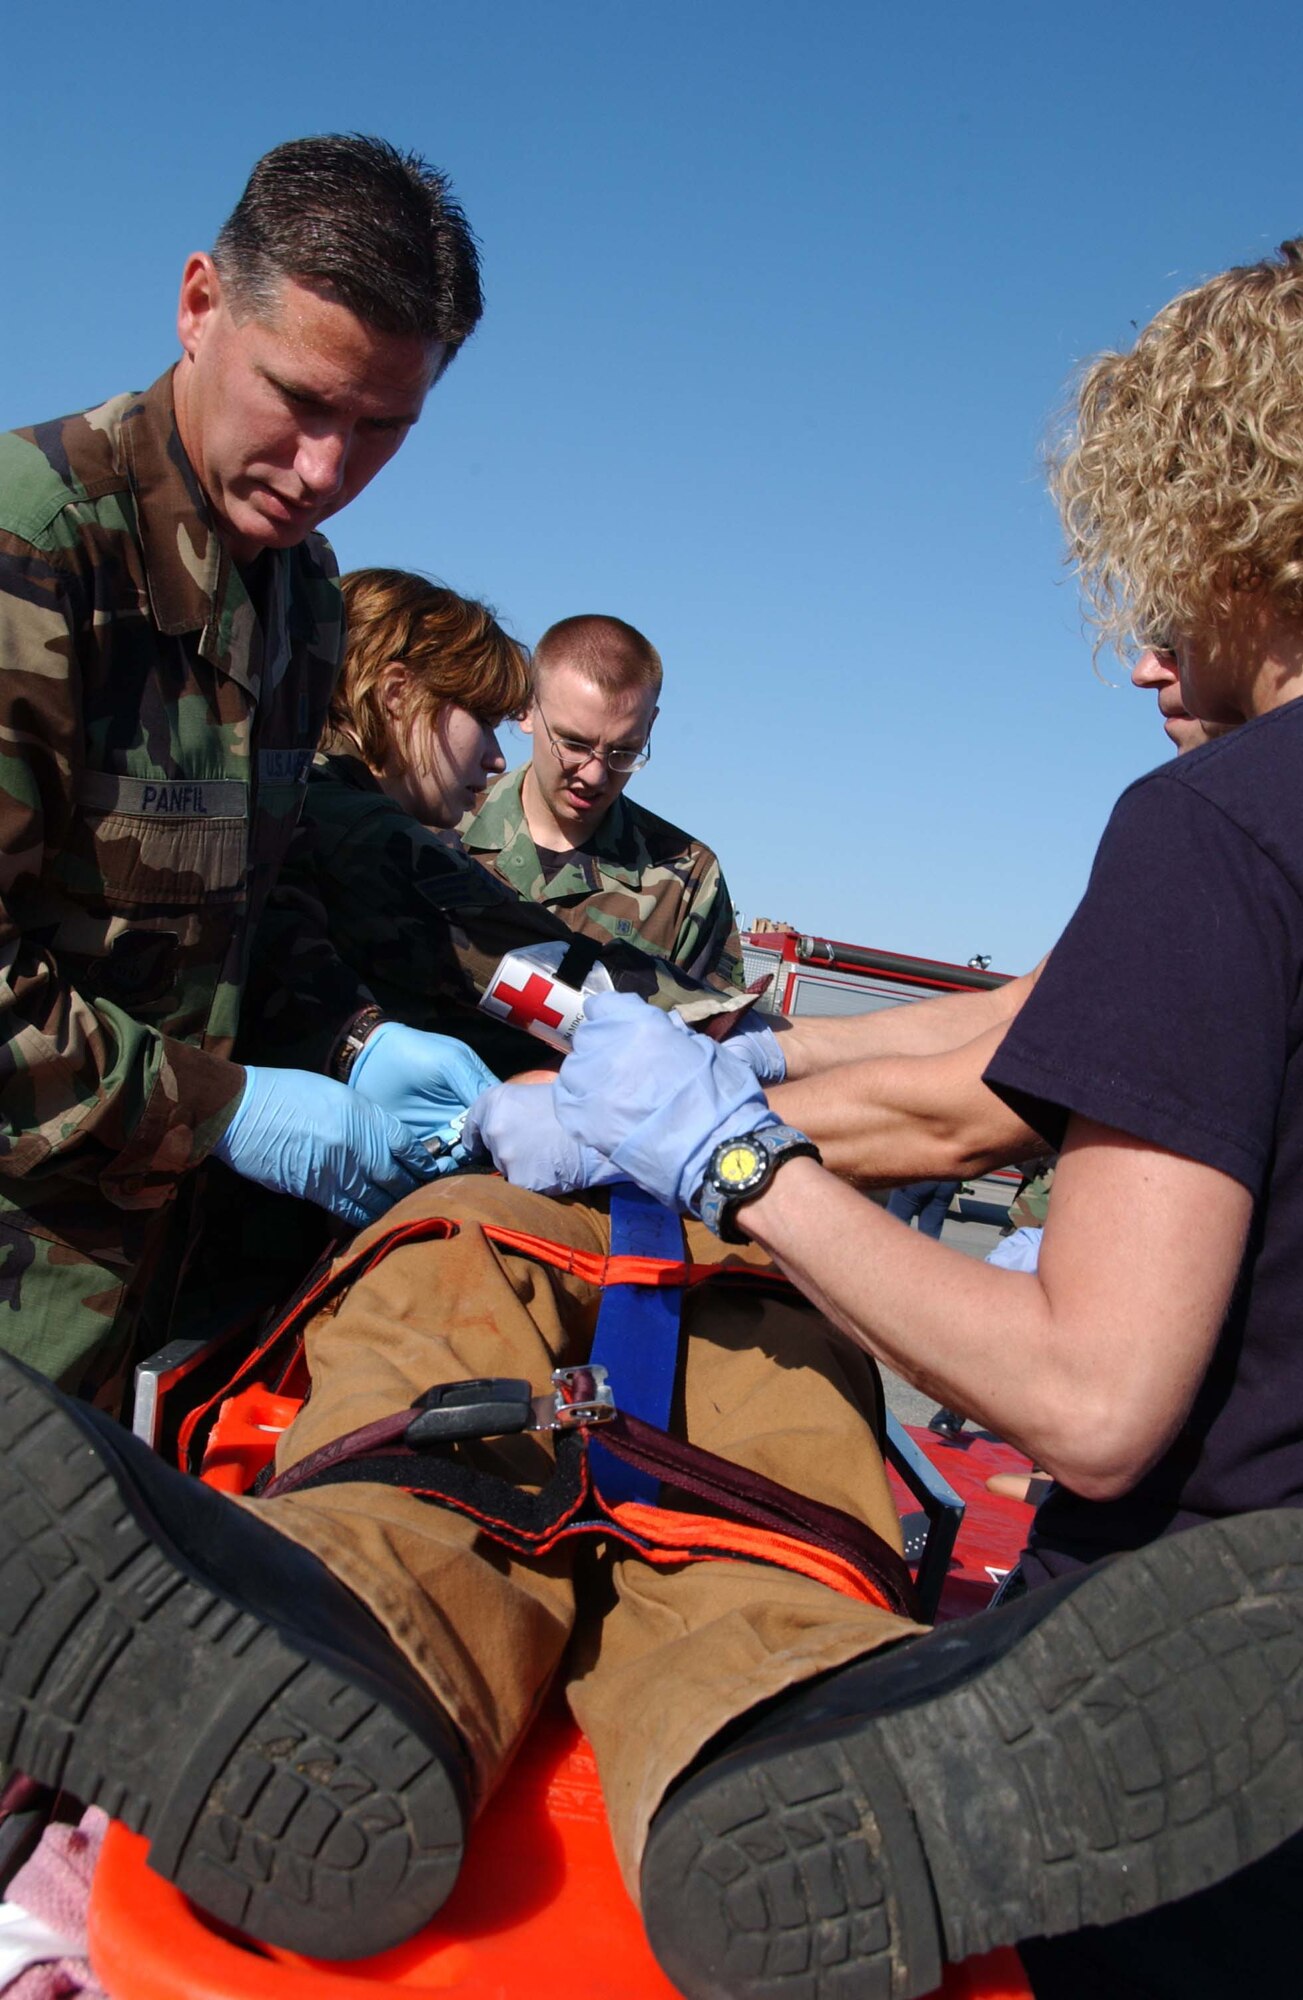 EIELSON AIR FORCE BASE, Alaska --  354th Medical Group members help in the aid of an injured bystander June 19 here. Eielson held an emergency management exercise to help in the readiness and response in case of unforeseen events, members of the medical group attend to those who are injured and to make sure they get the attention and care they need.   (U.S. Air Force photo by Airman 1st Class Christopher Griffin)